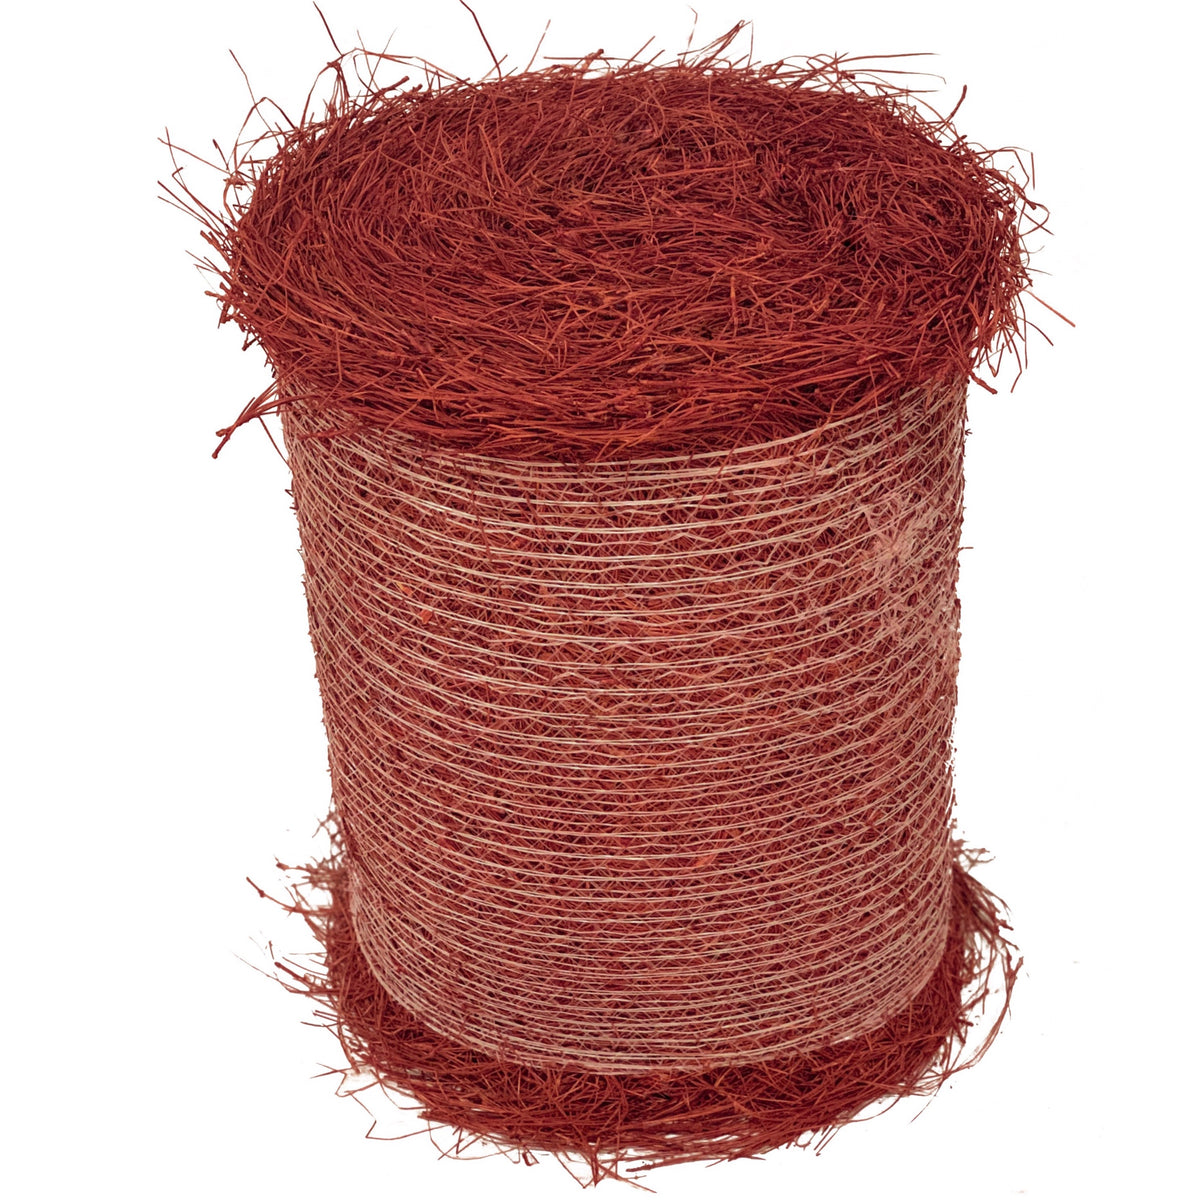 Longleaf Pine Straw - Colored Red Roll - 100-125 Sq. Ft. -- FREE SHPPI –  Colored Pine Straw